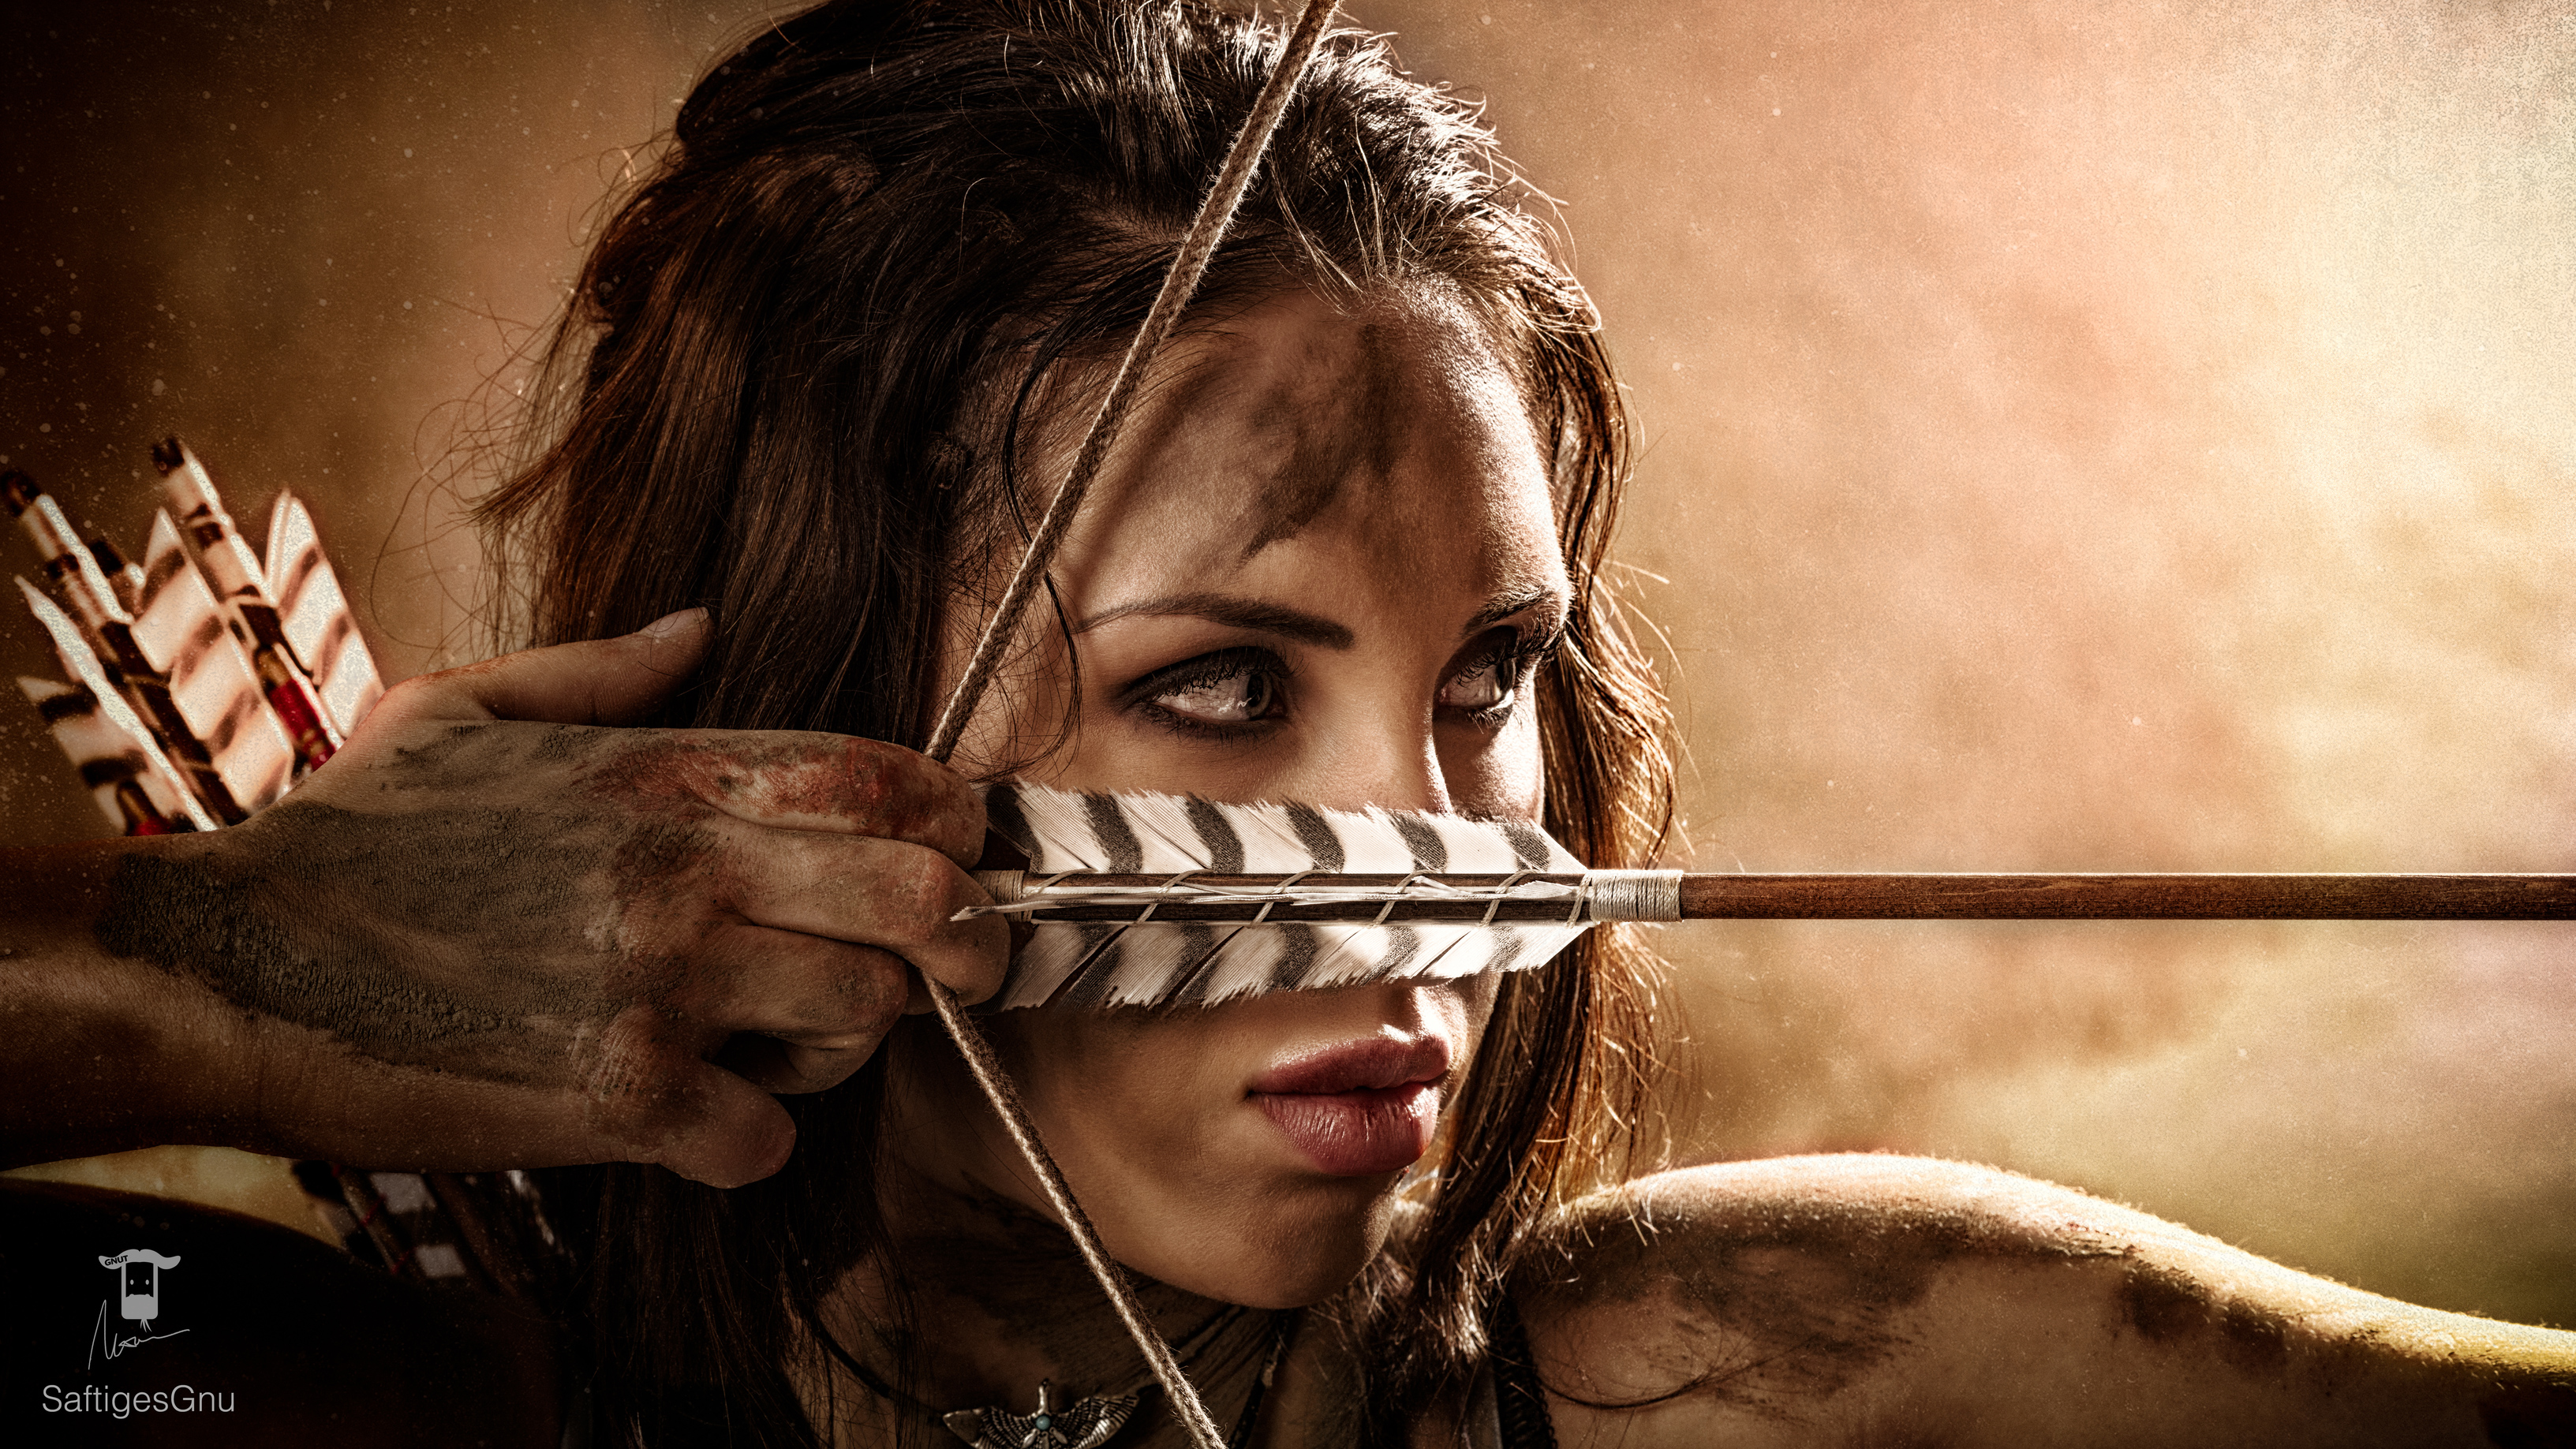 People 3265x1837 women model brunette long hair face arrows archer bow and arrow dirty hands cosplay Lara Croft (Tomb Raider) video games video game characters dirt blood